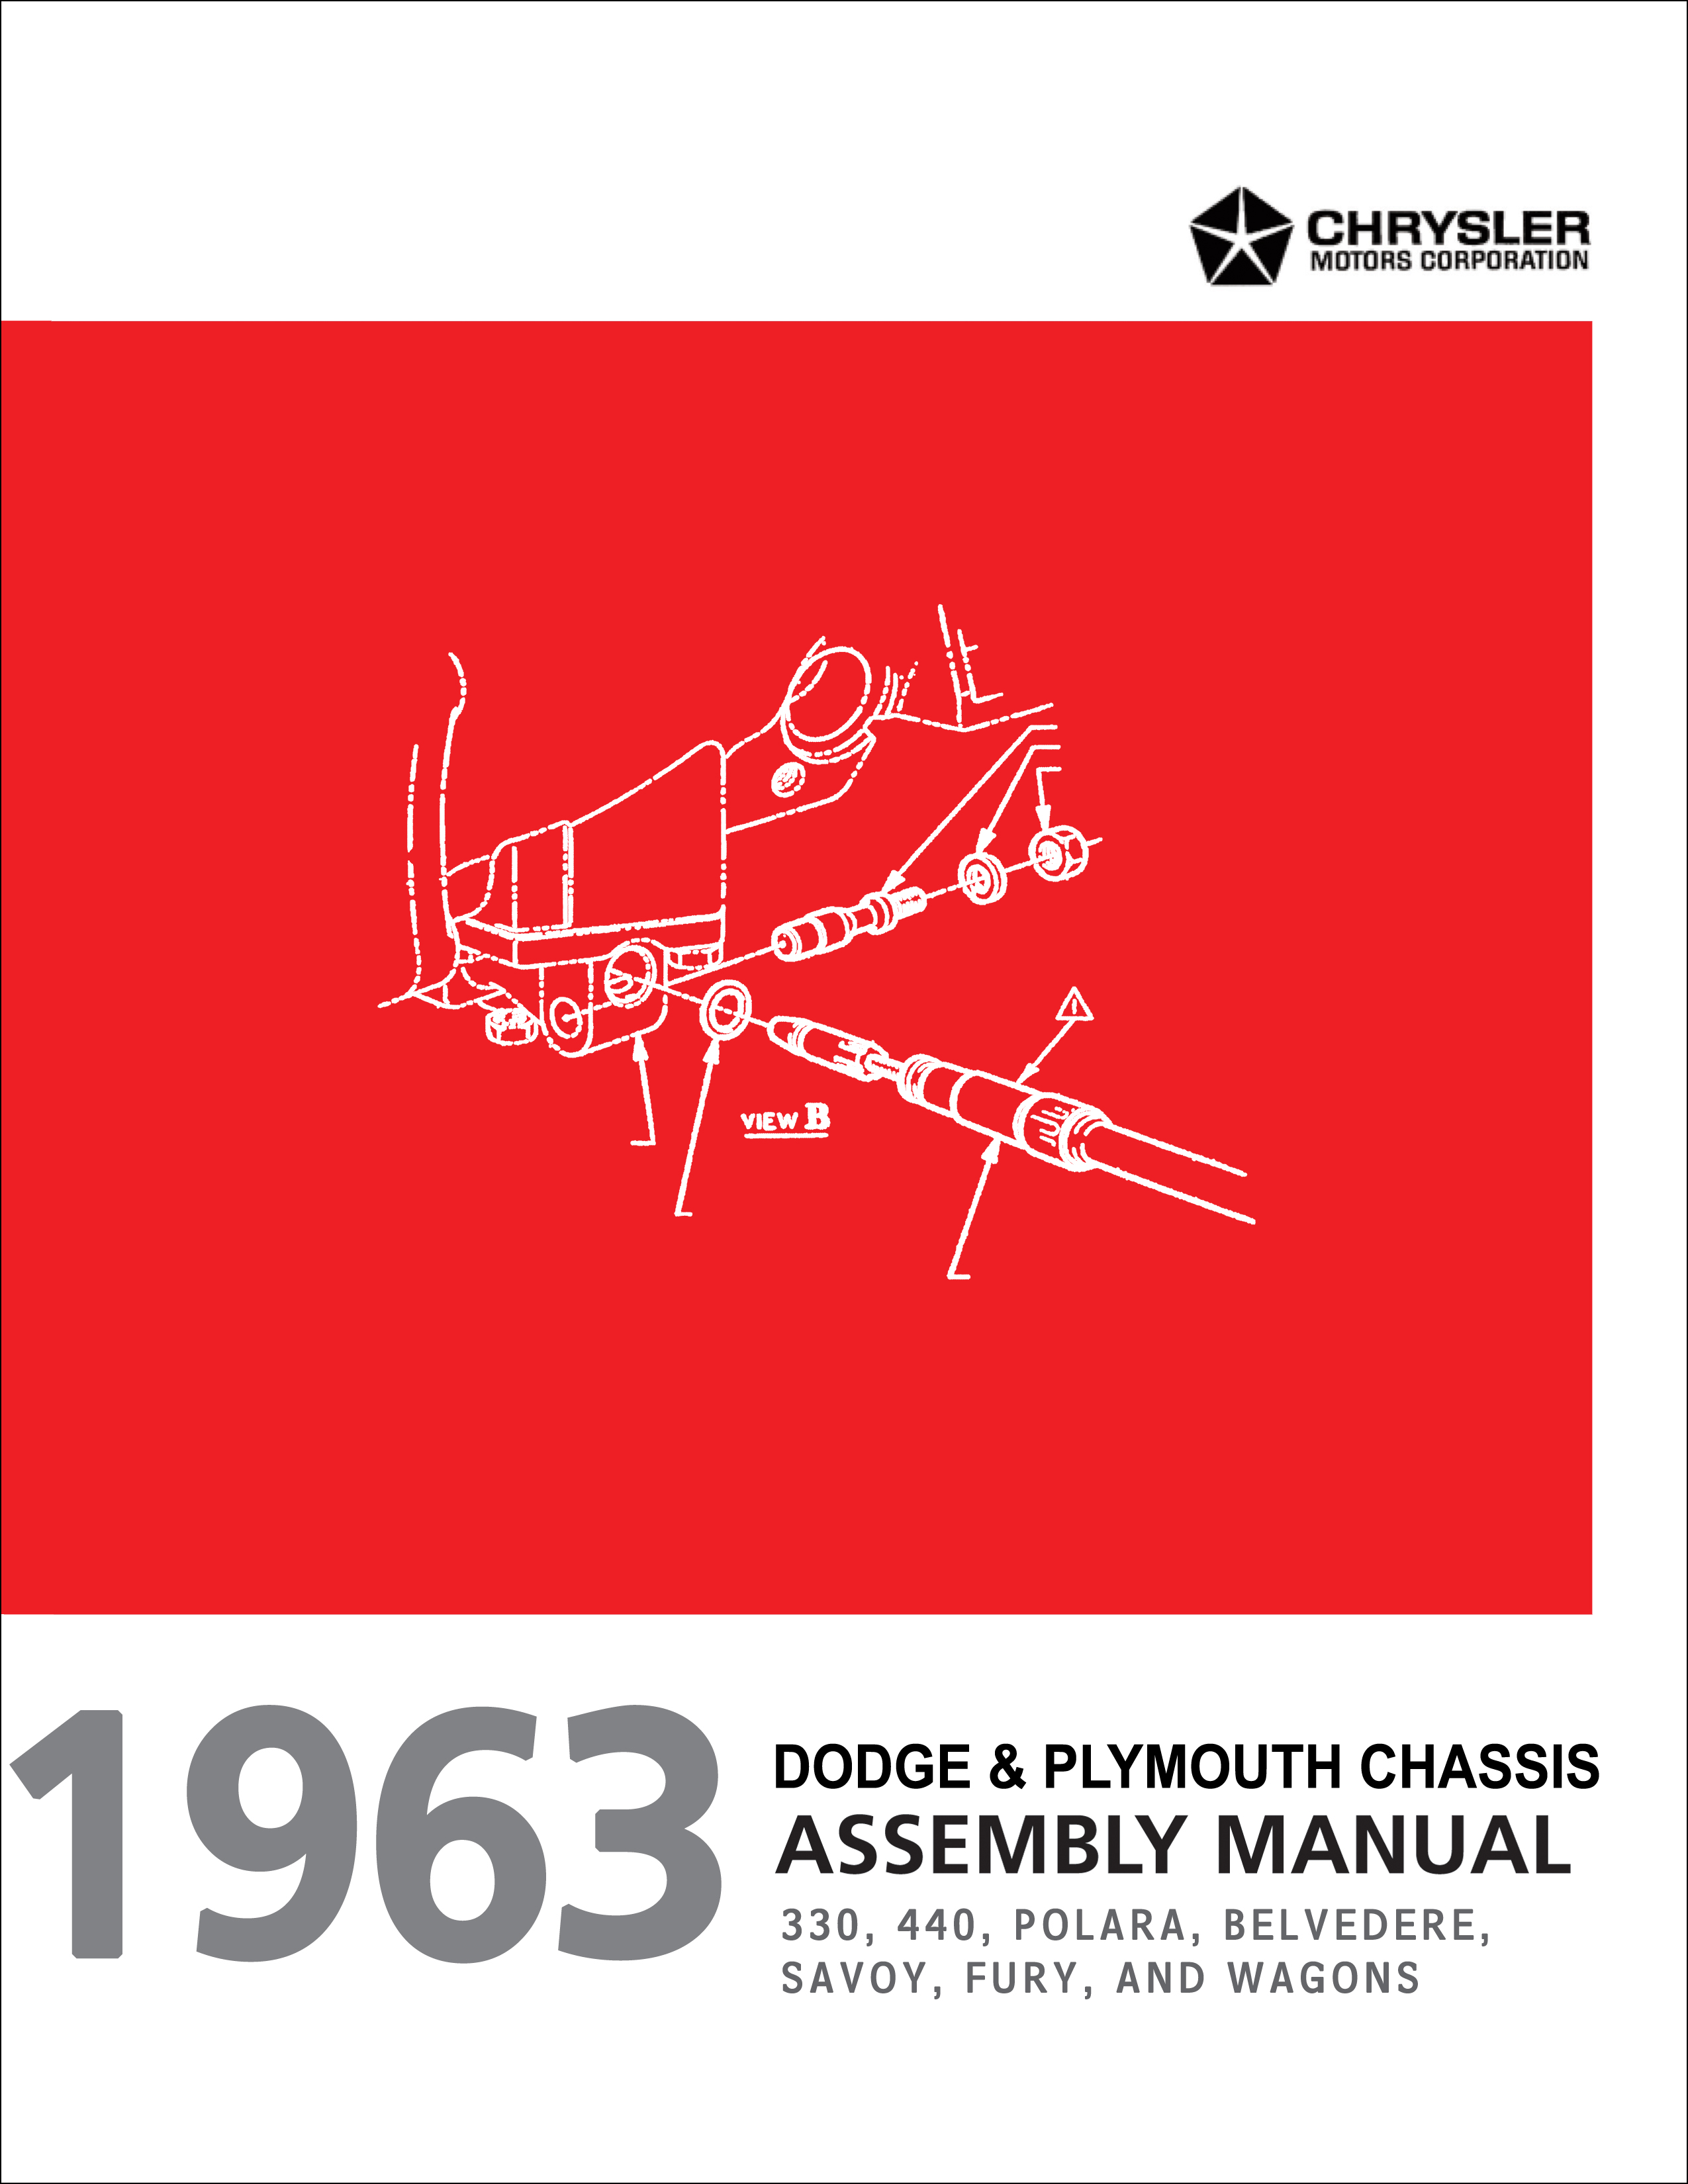 1963 Fury, Savoy, Belvedere, Polara, 330, 440 Chassis Assembly Manual Reprint Dodge Plymouth